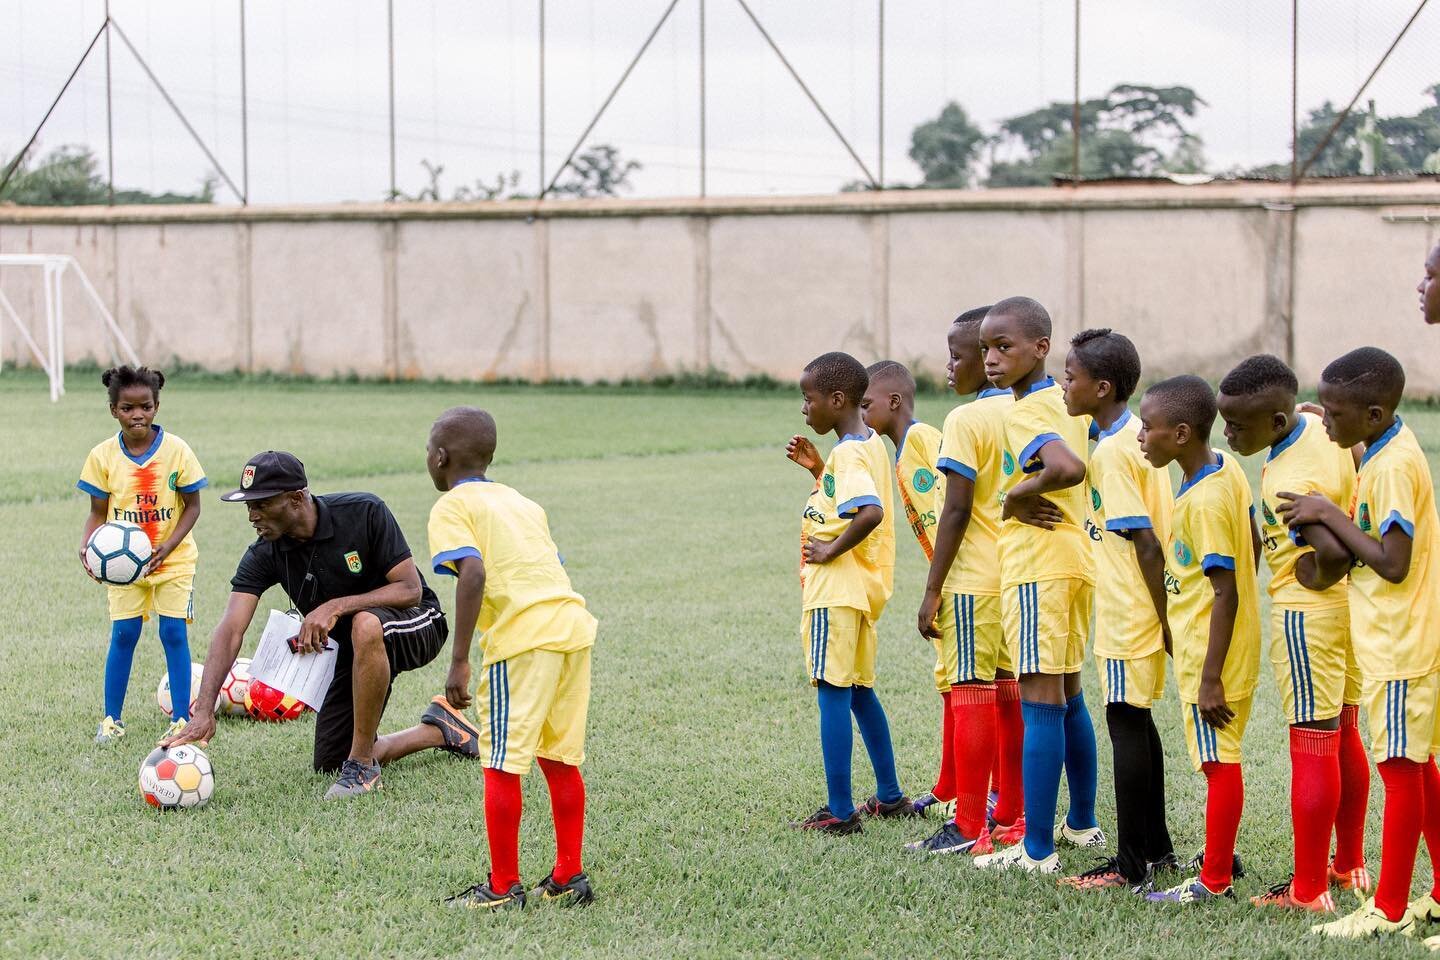 Without teamwork, nothing can be achieved as a group!

&mdash;-

Sans travail d'&eacute;quipe, rien ne peut &ecirc;tre r&eacute;alis&eacute; en groupe !

#football #Cameroon #youthfootball #girlsfootball #womensfootball #youthdevelopment #coaching #f